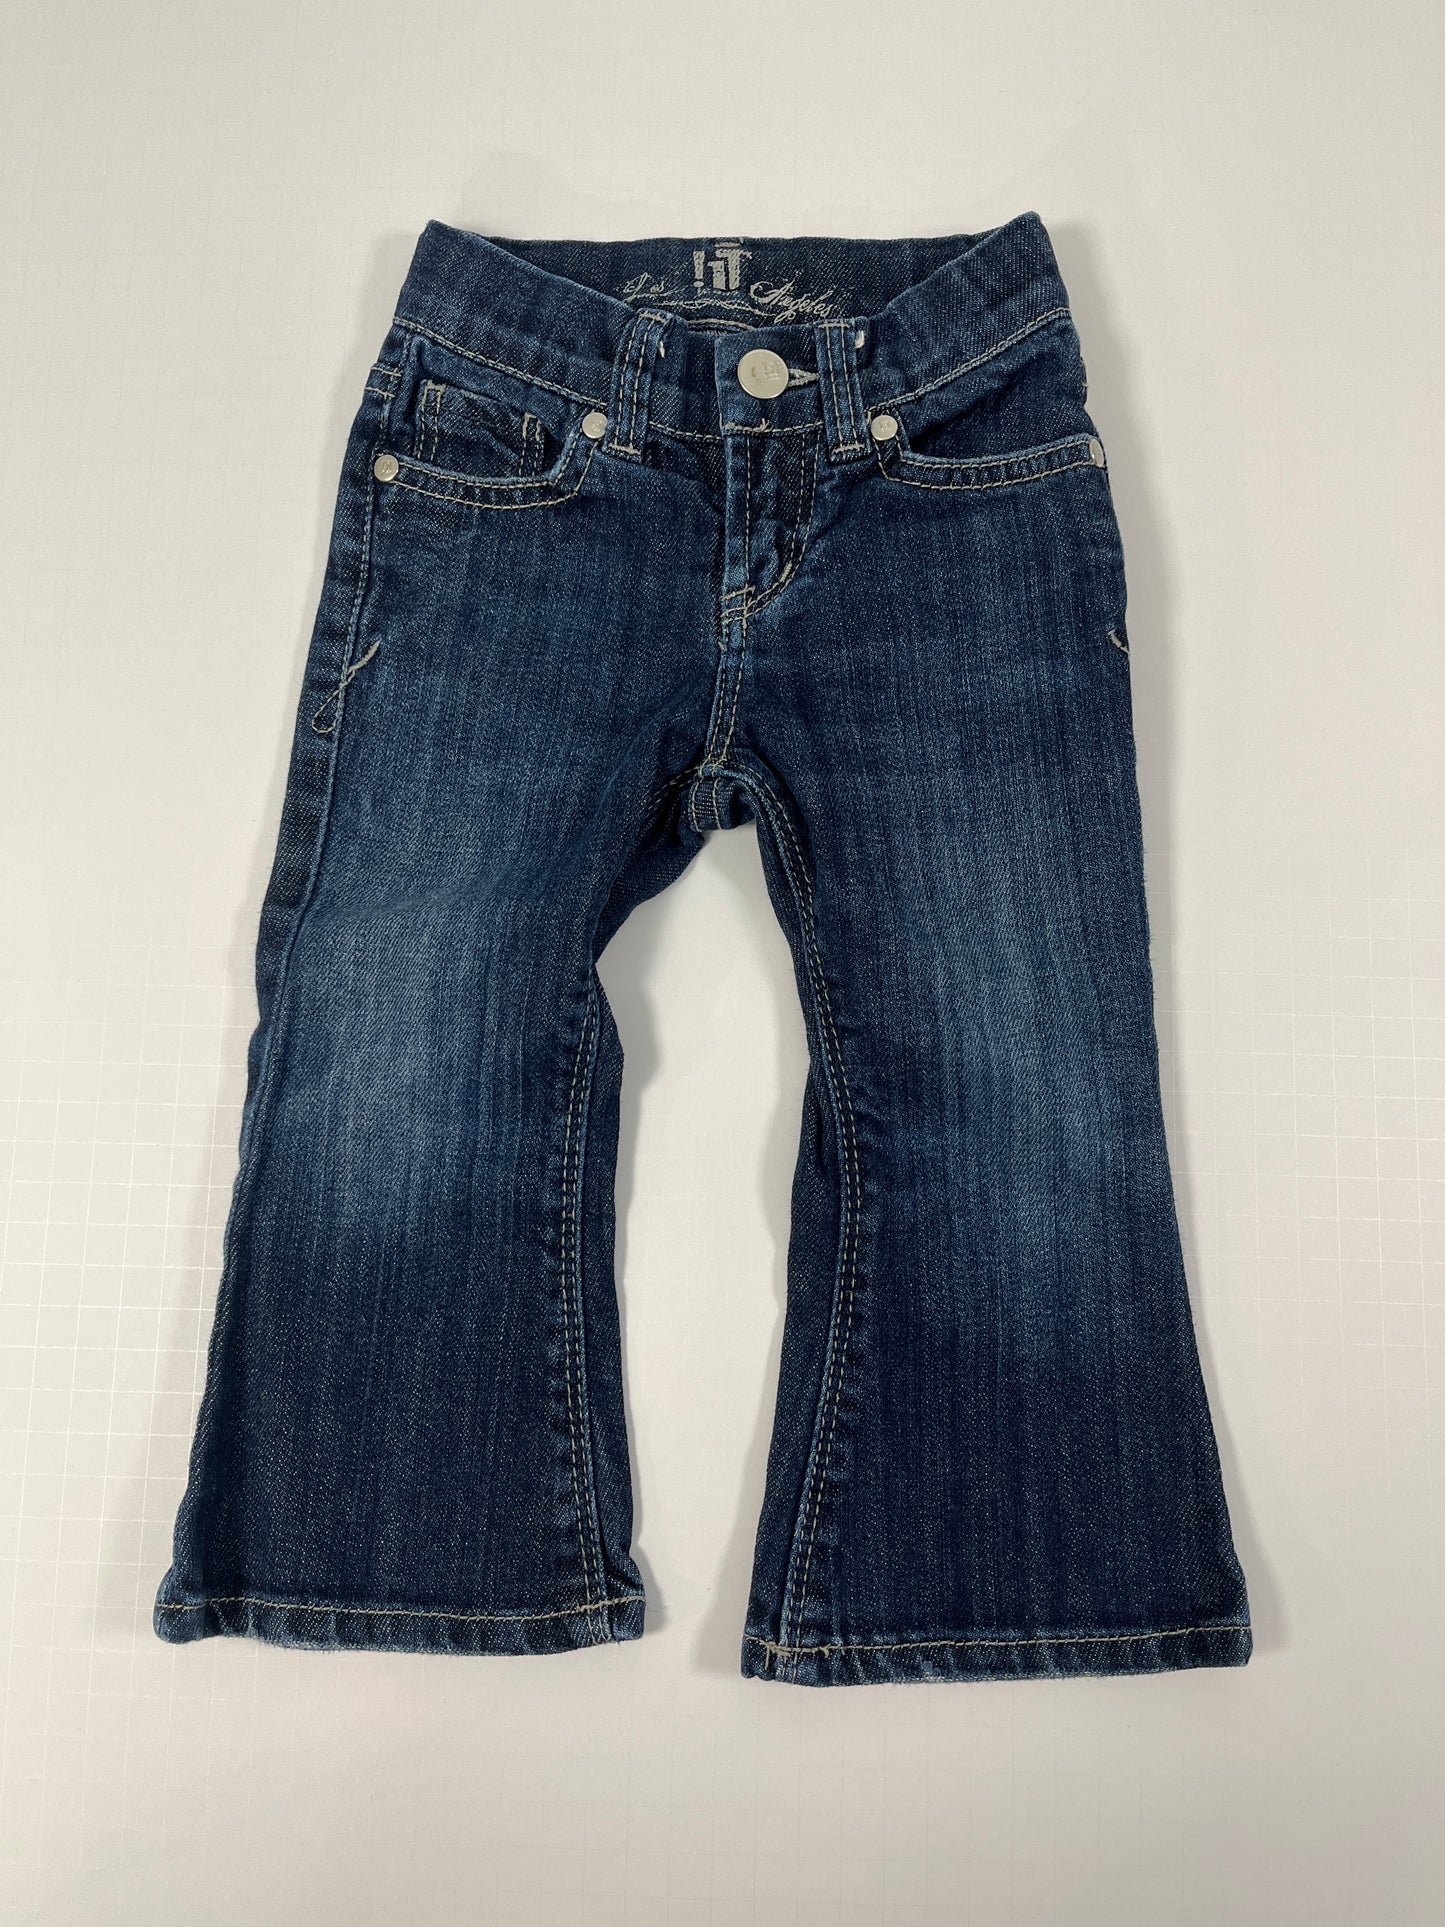 PPU 45242 2T girls !it jeans flare leg with bedazzled pockets